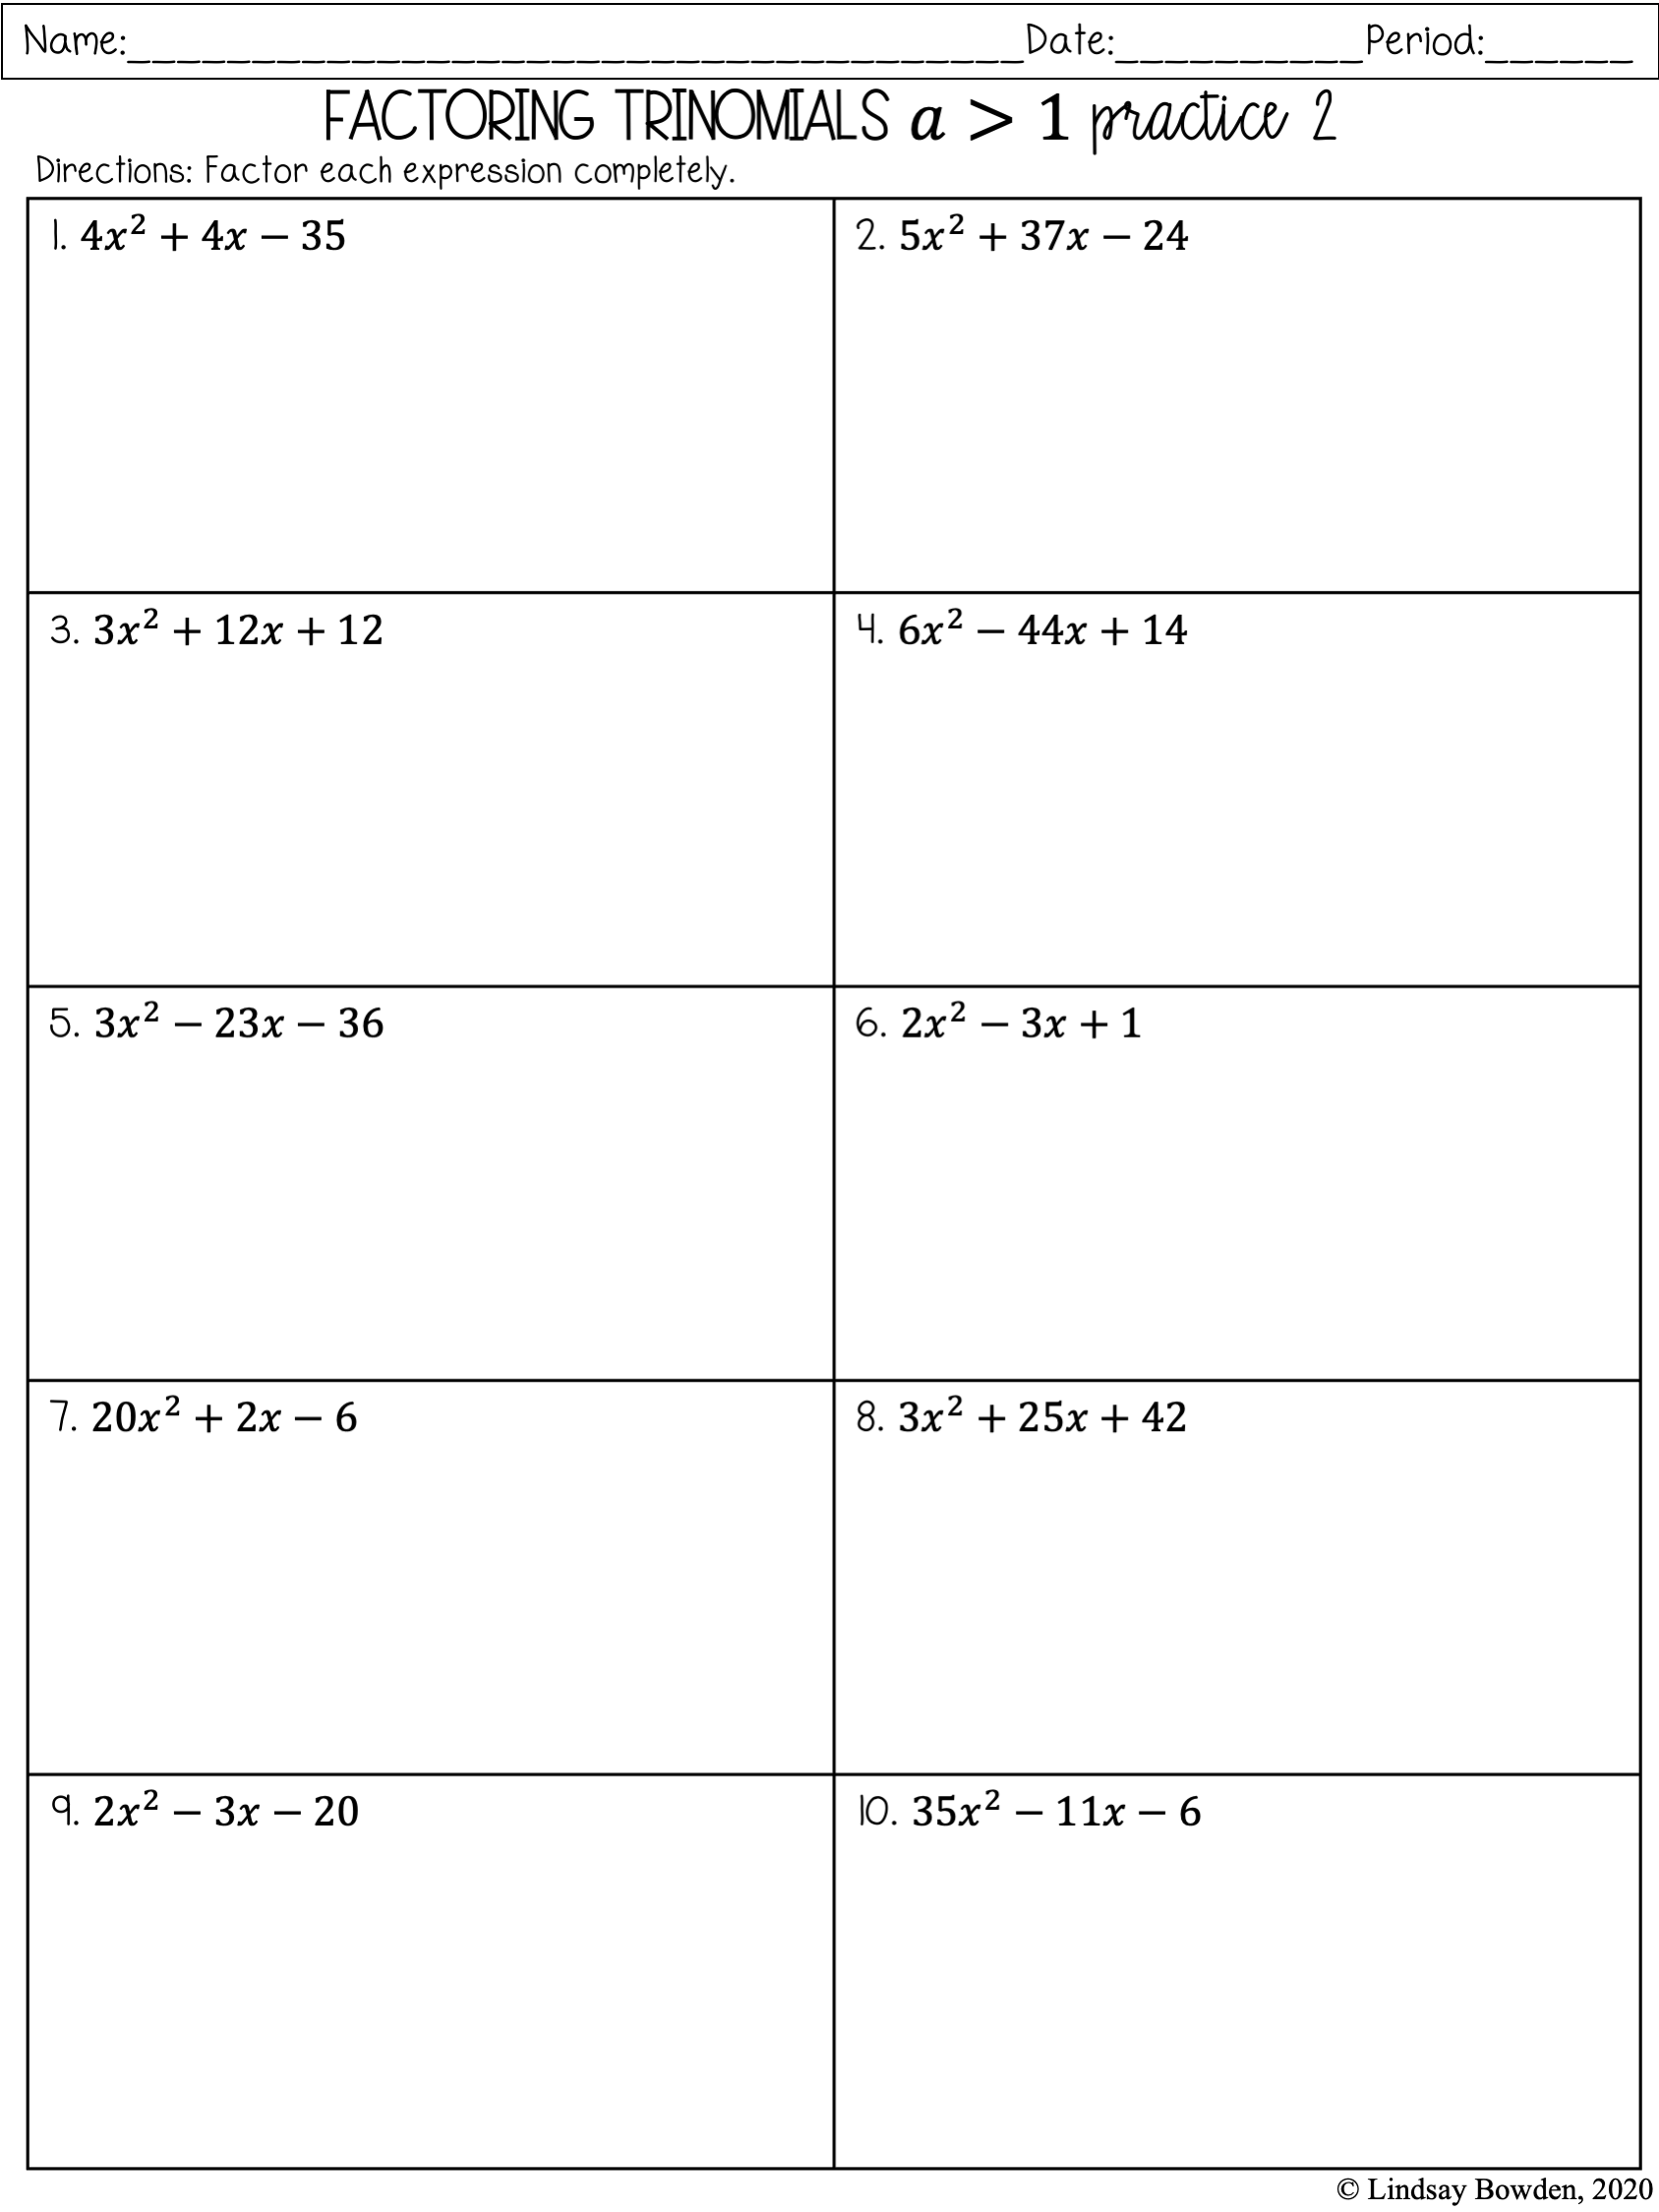 Factoring Polynomials Notes and Worksheets - Lindsay Bowden Inside Factoring By Grouping Worksheet Answers